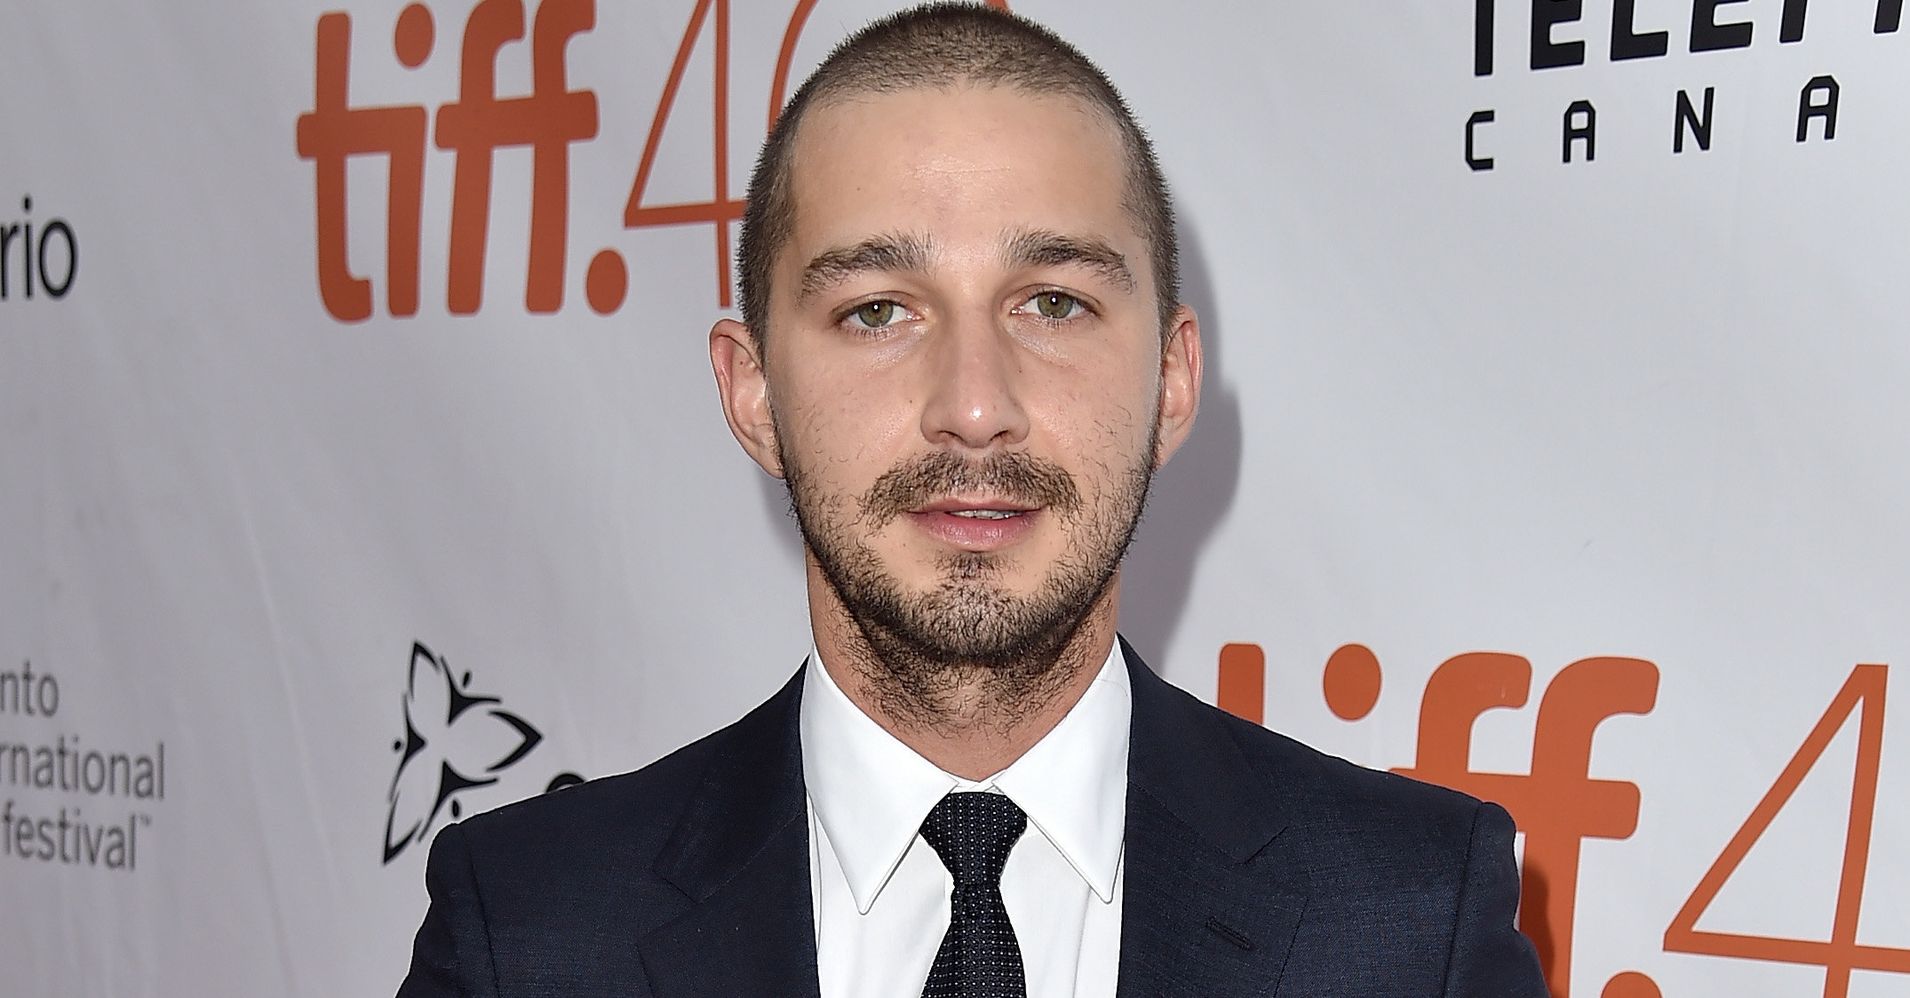 Shia LaBeouf Apparently Hit A Fan In The Face For The Sake Of Art | HuffPost